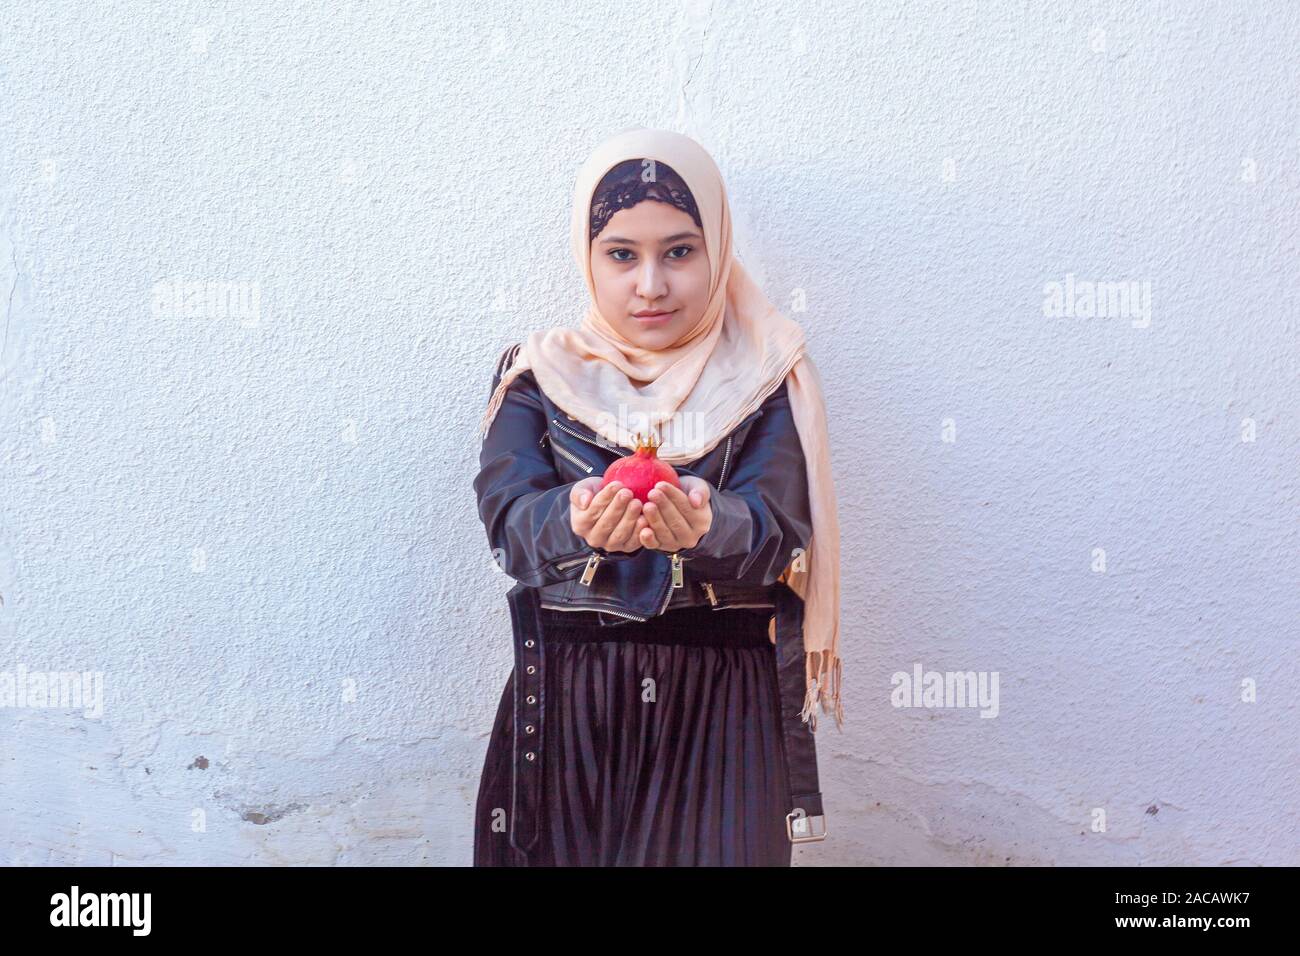 Beautiful middle-eastern girl holding pomegranate fruit. Cute Arabian Muslim woman received unique present - exotic fruit pomegranate Stock Photo